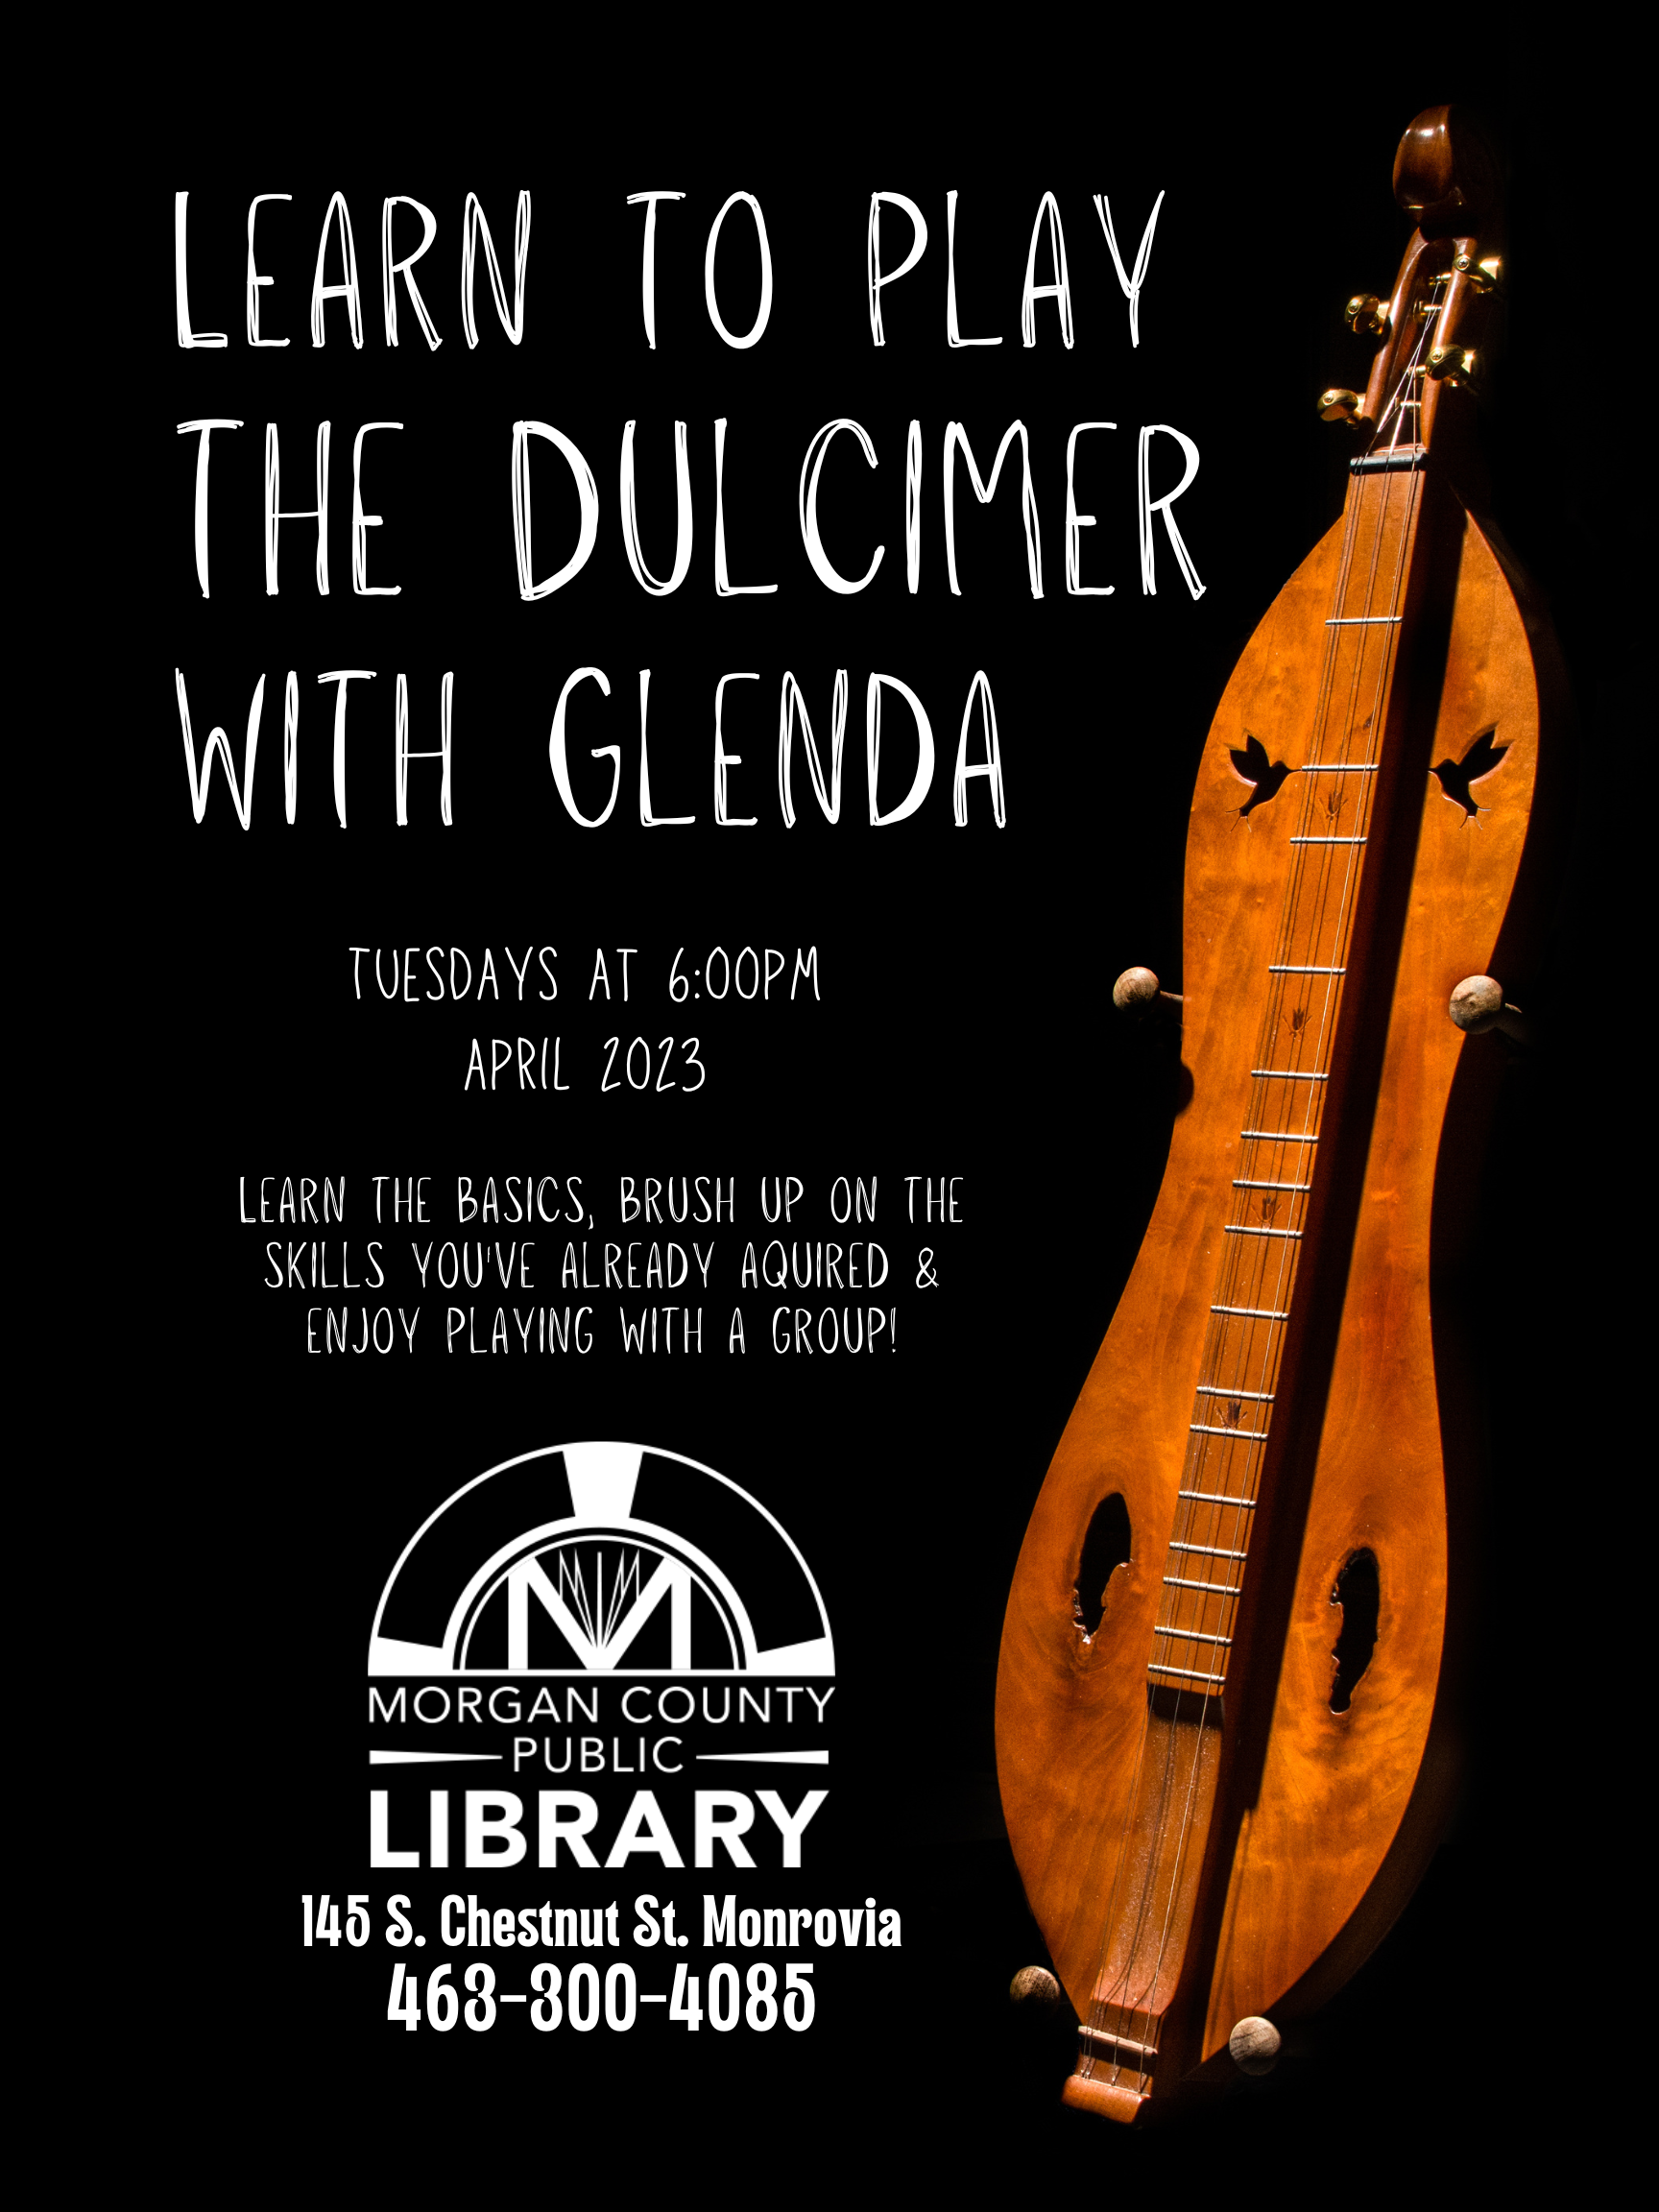 black background with photograph of dulcimer, text and library logo